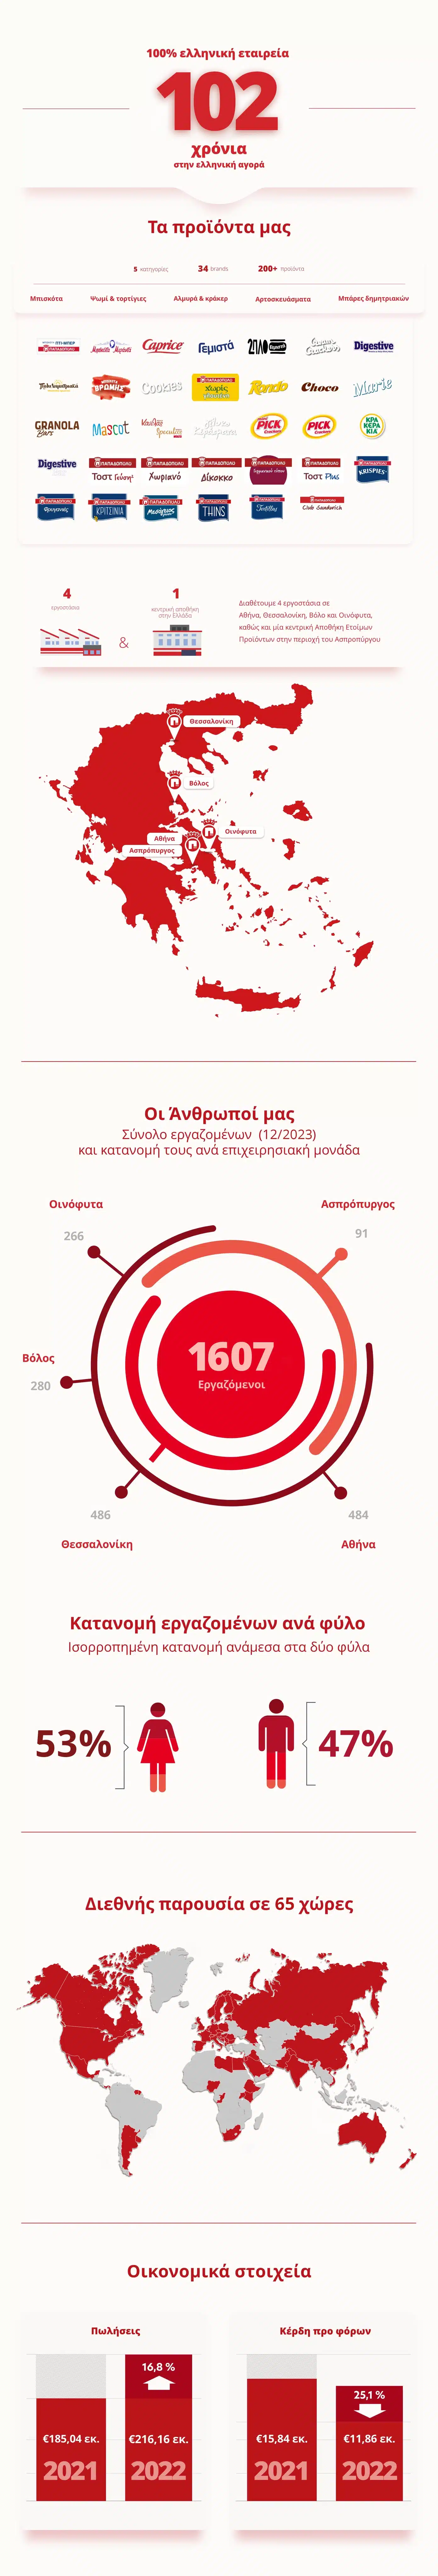 Main Infographic Image for papadopoulou